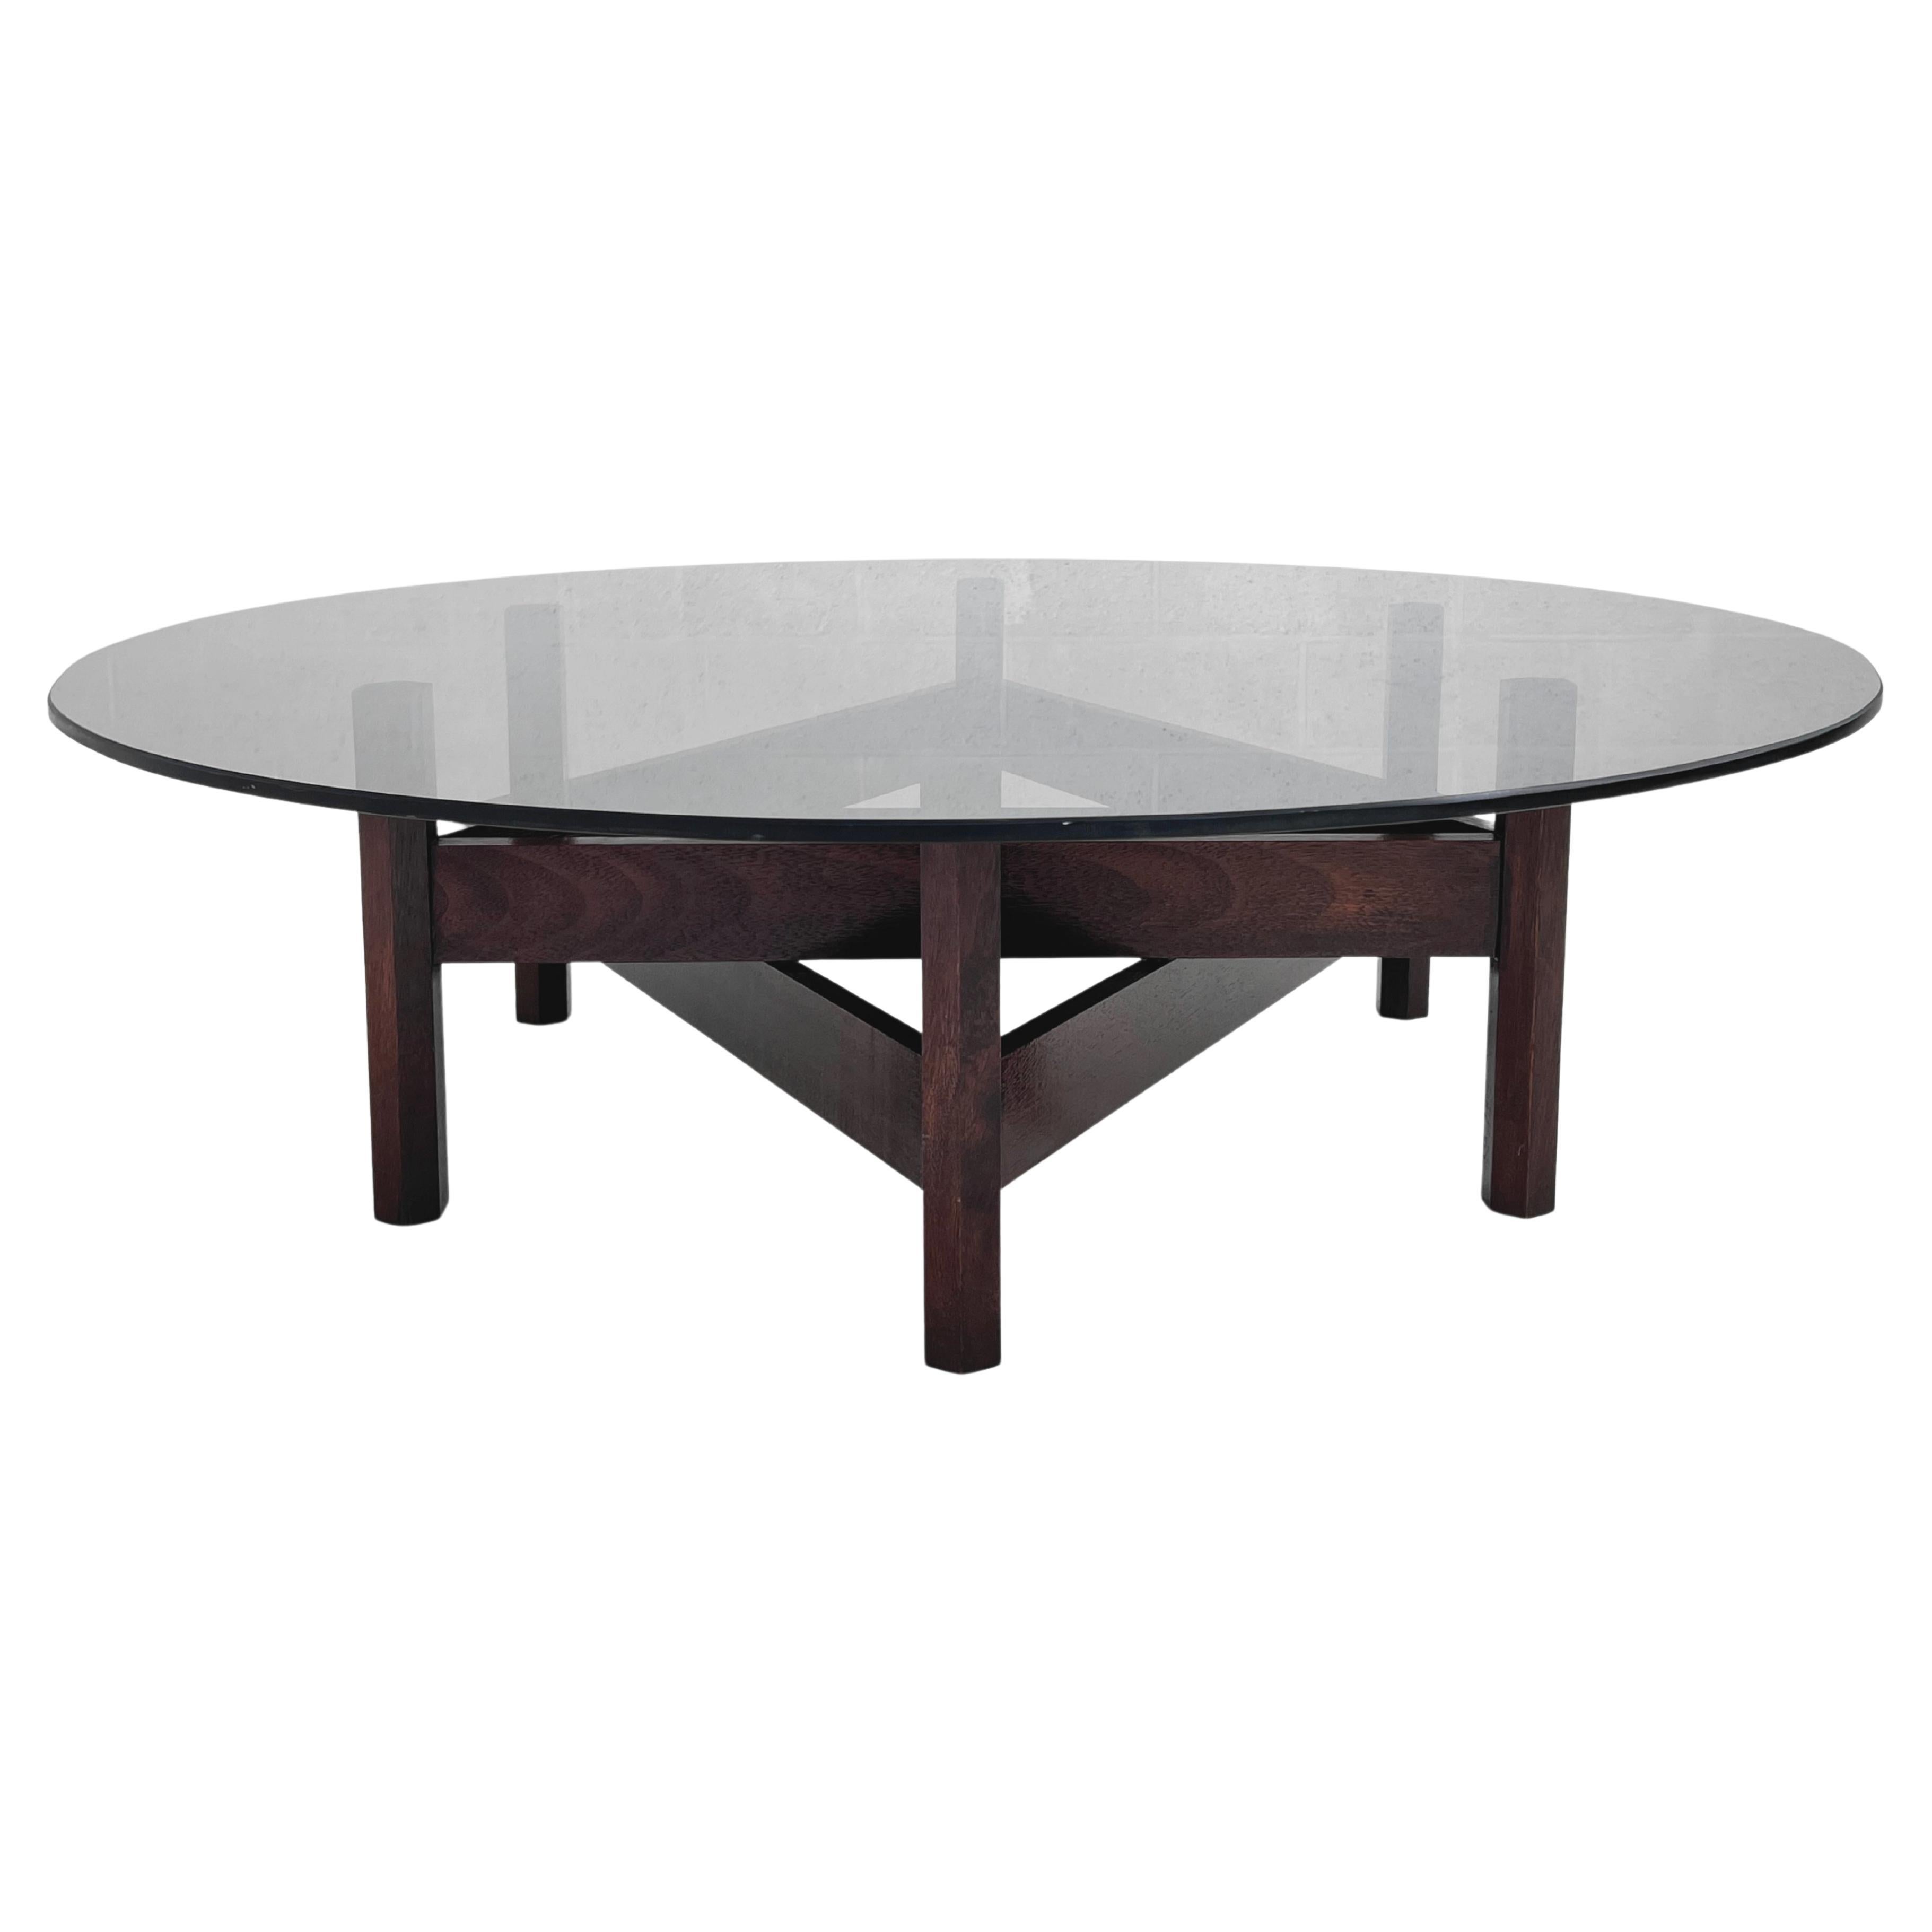 MCM Design Round Glass Top And Star Wooden Base Coffee Table For Sale